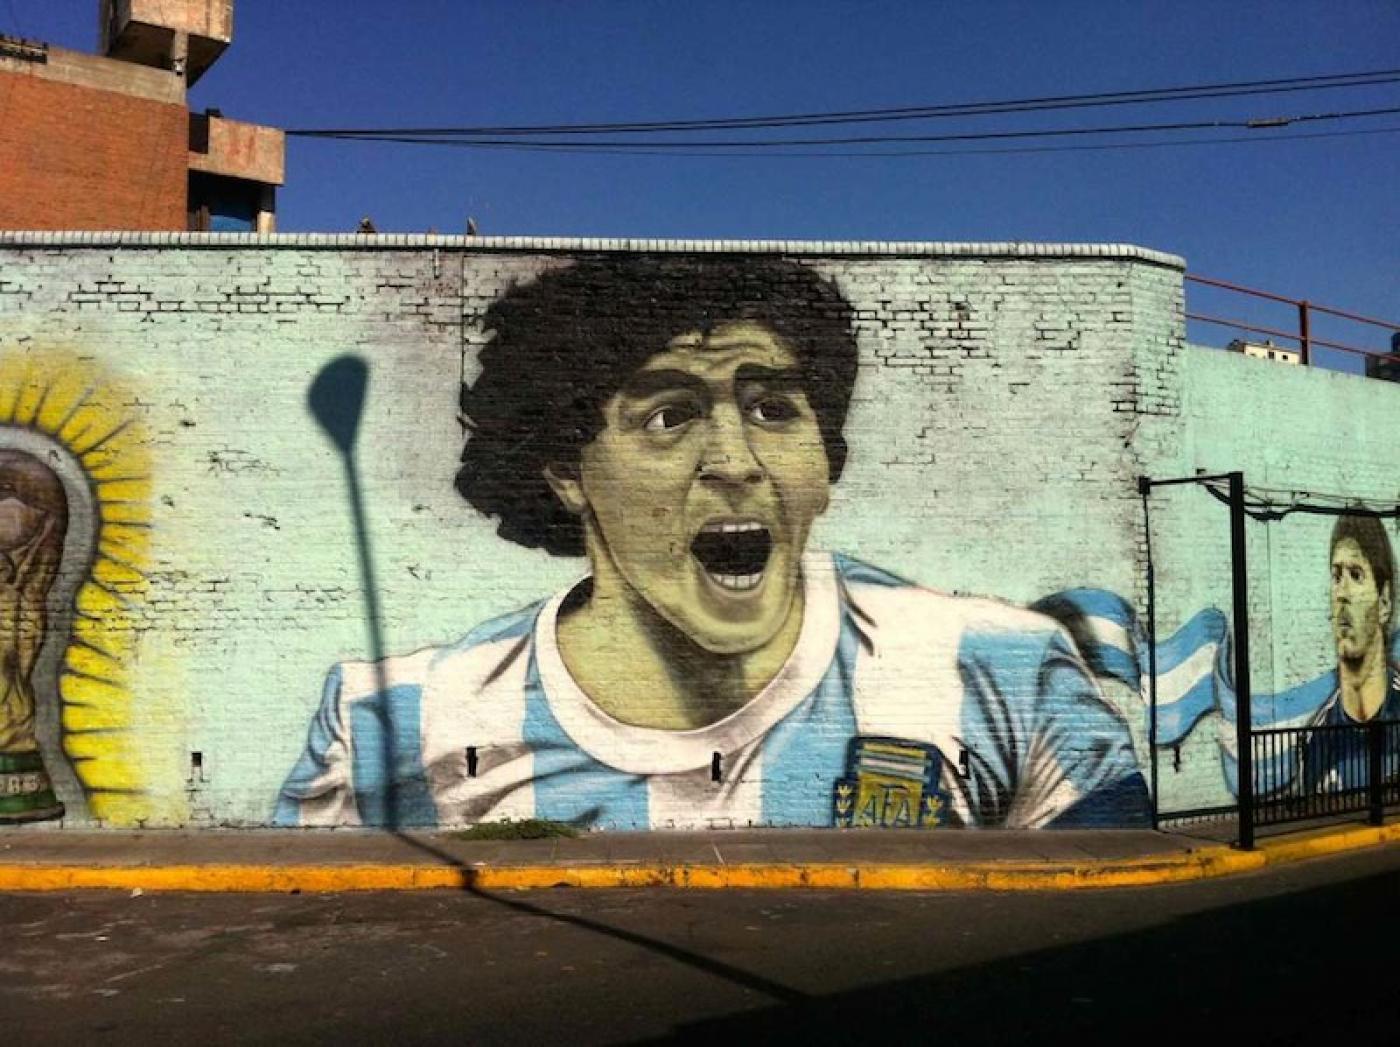 A mural in the suburb of Once, Buenos Aires.